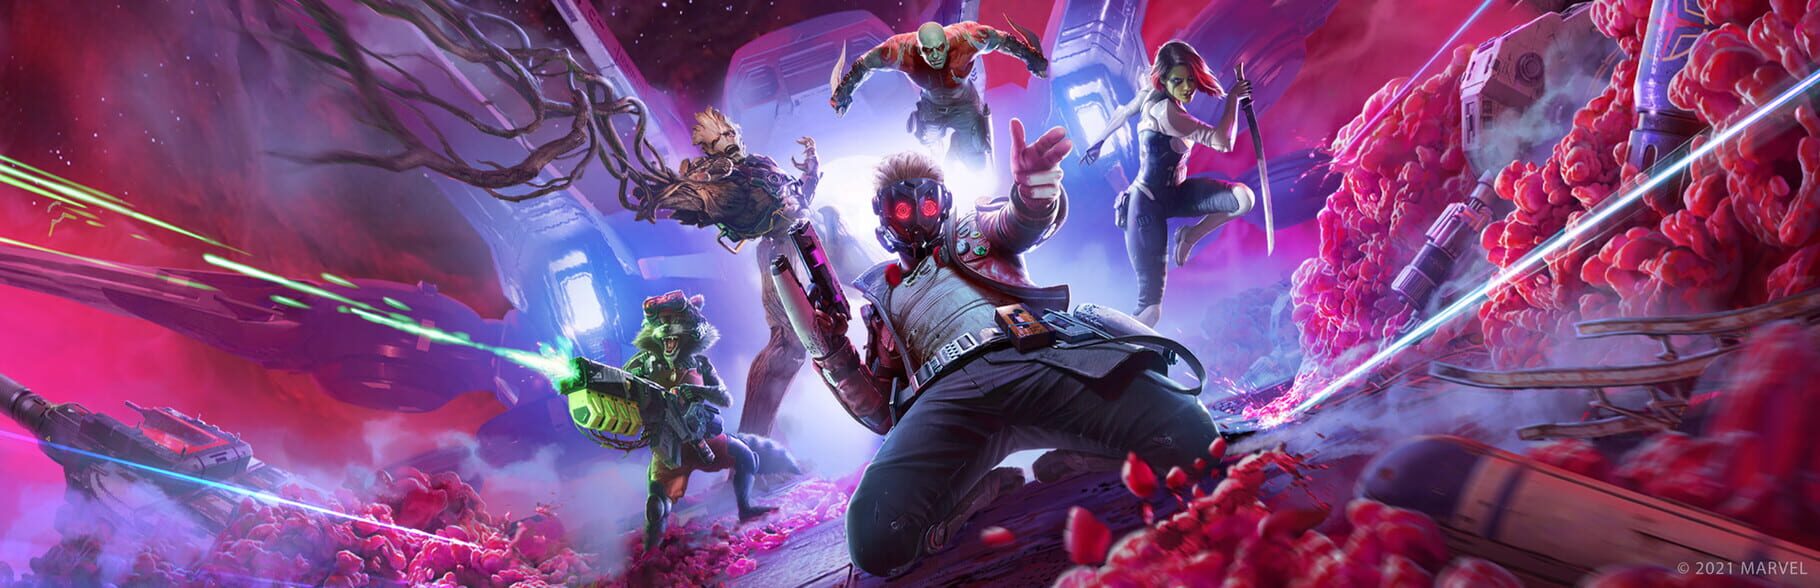 Artwork for Marvel's Guardians of the Galaxy